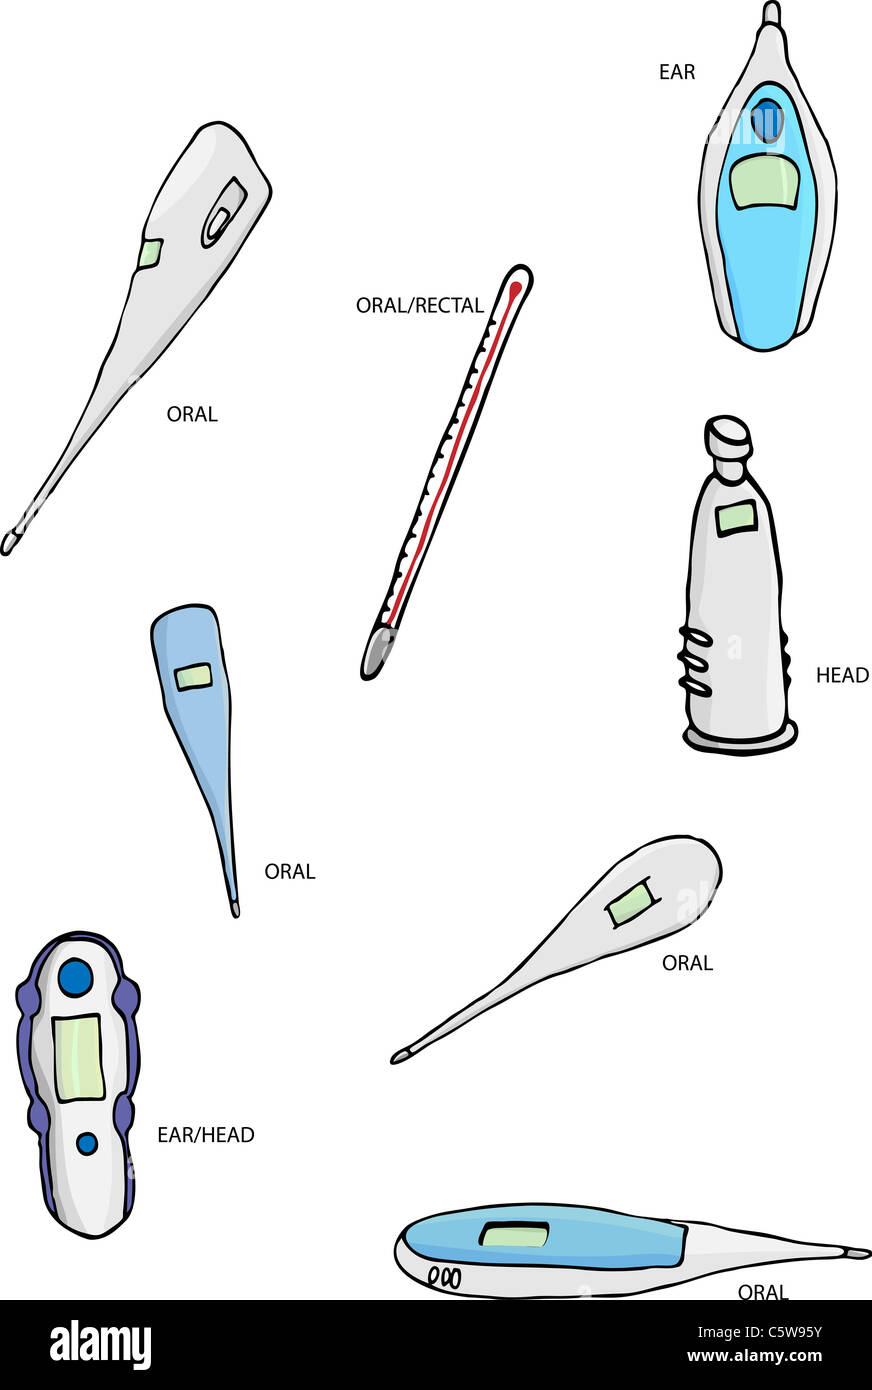 A set of 8 thermometer illustrations, both digital and traditional mercury types. Stock Photo